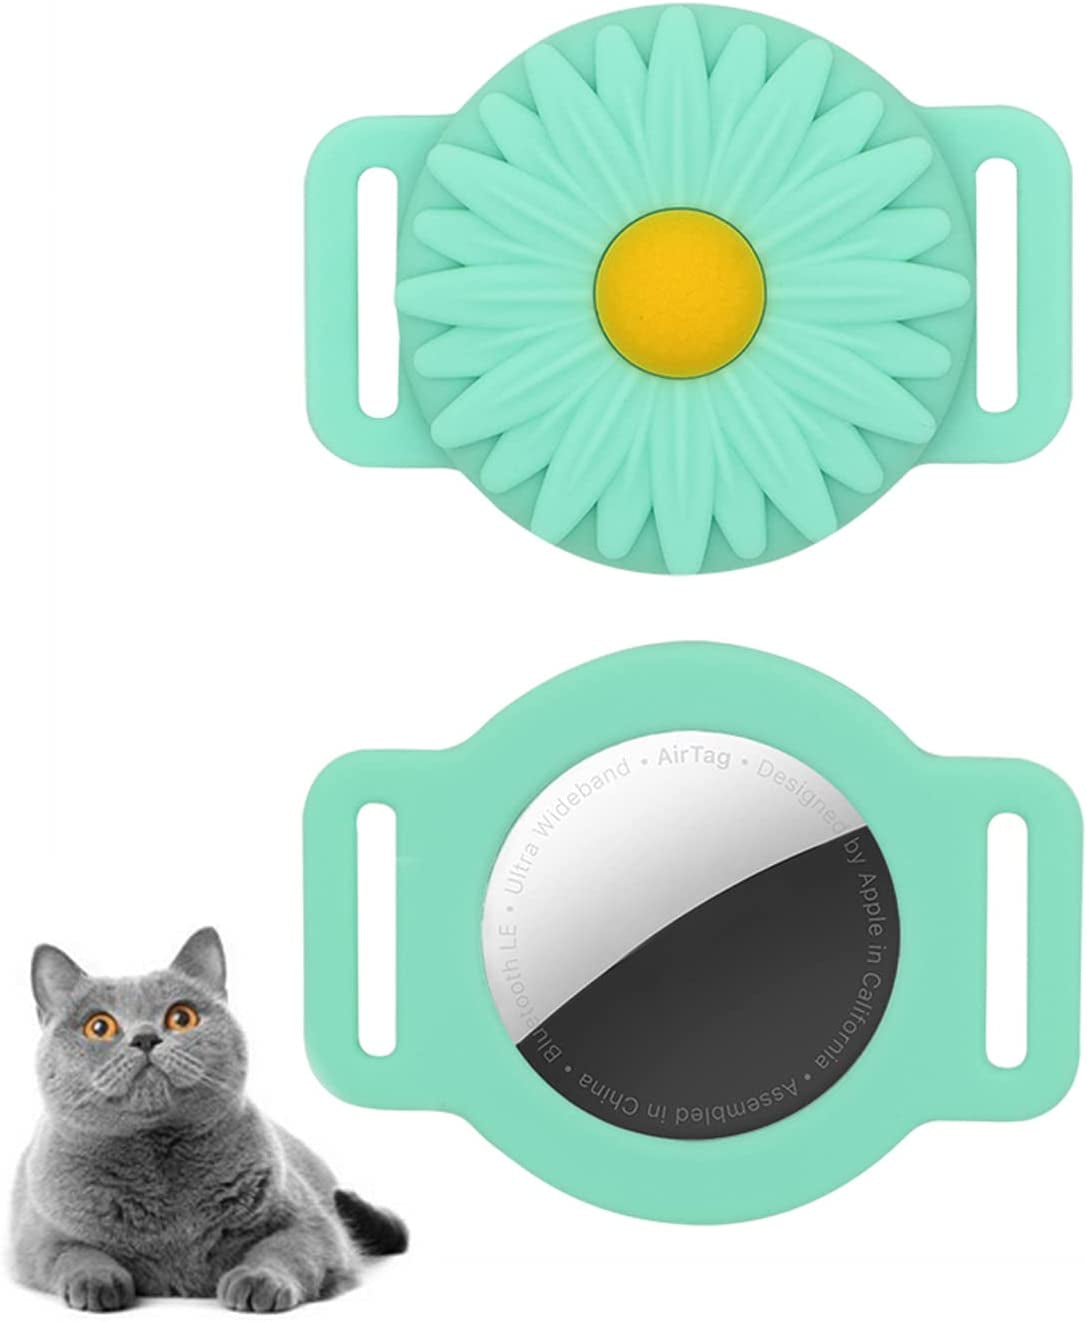 Airtag Cat Collar Holder for Apple Air Tag Cat Collar Holder within 0.6 Inch, Airtag Dog Collar Holder, Airtag Pet Collar Holder for Apple Airtag Collar Small Airtag Protector